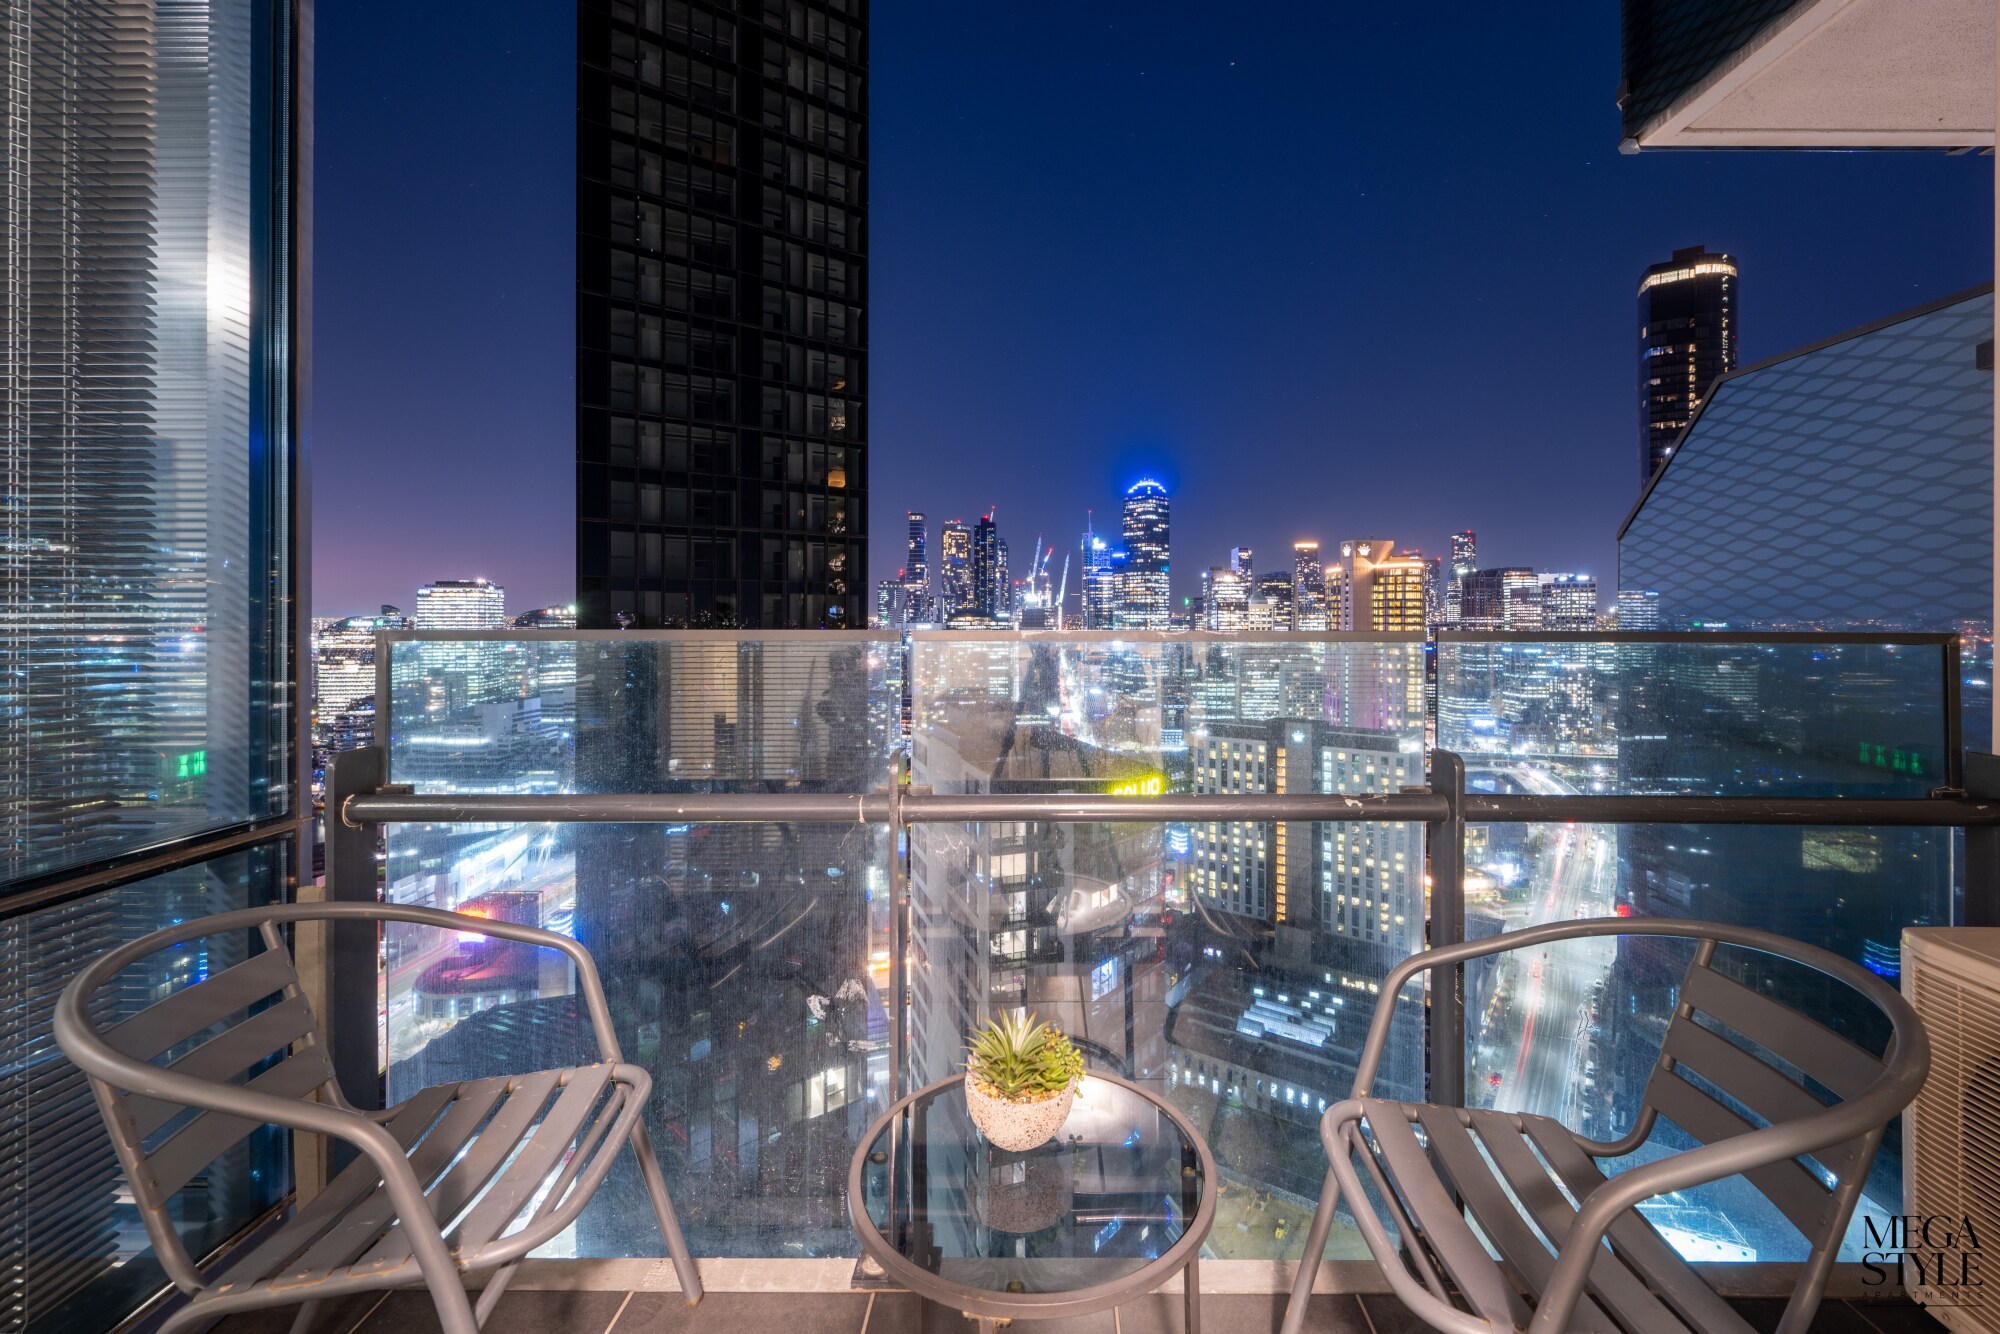 Take in the stunning 180 degree views across the city from your own glass balcony!